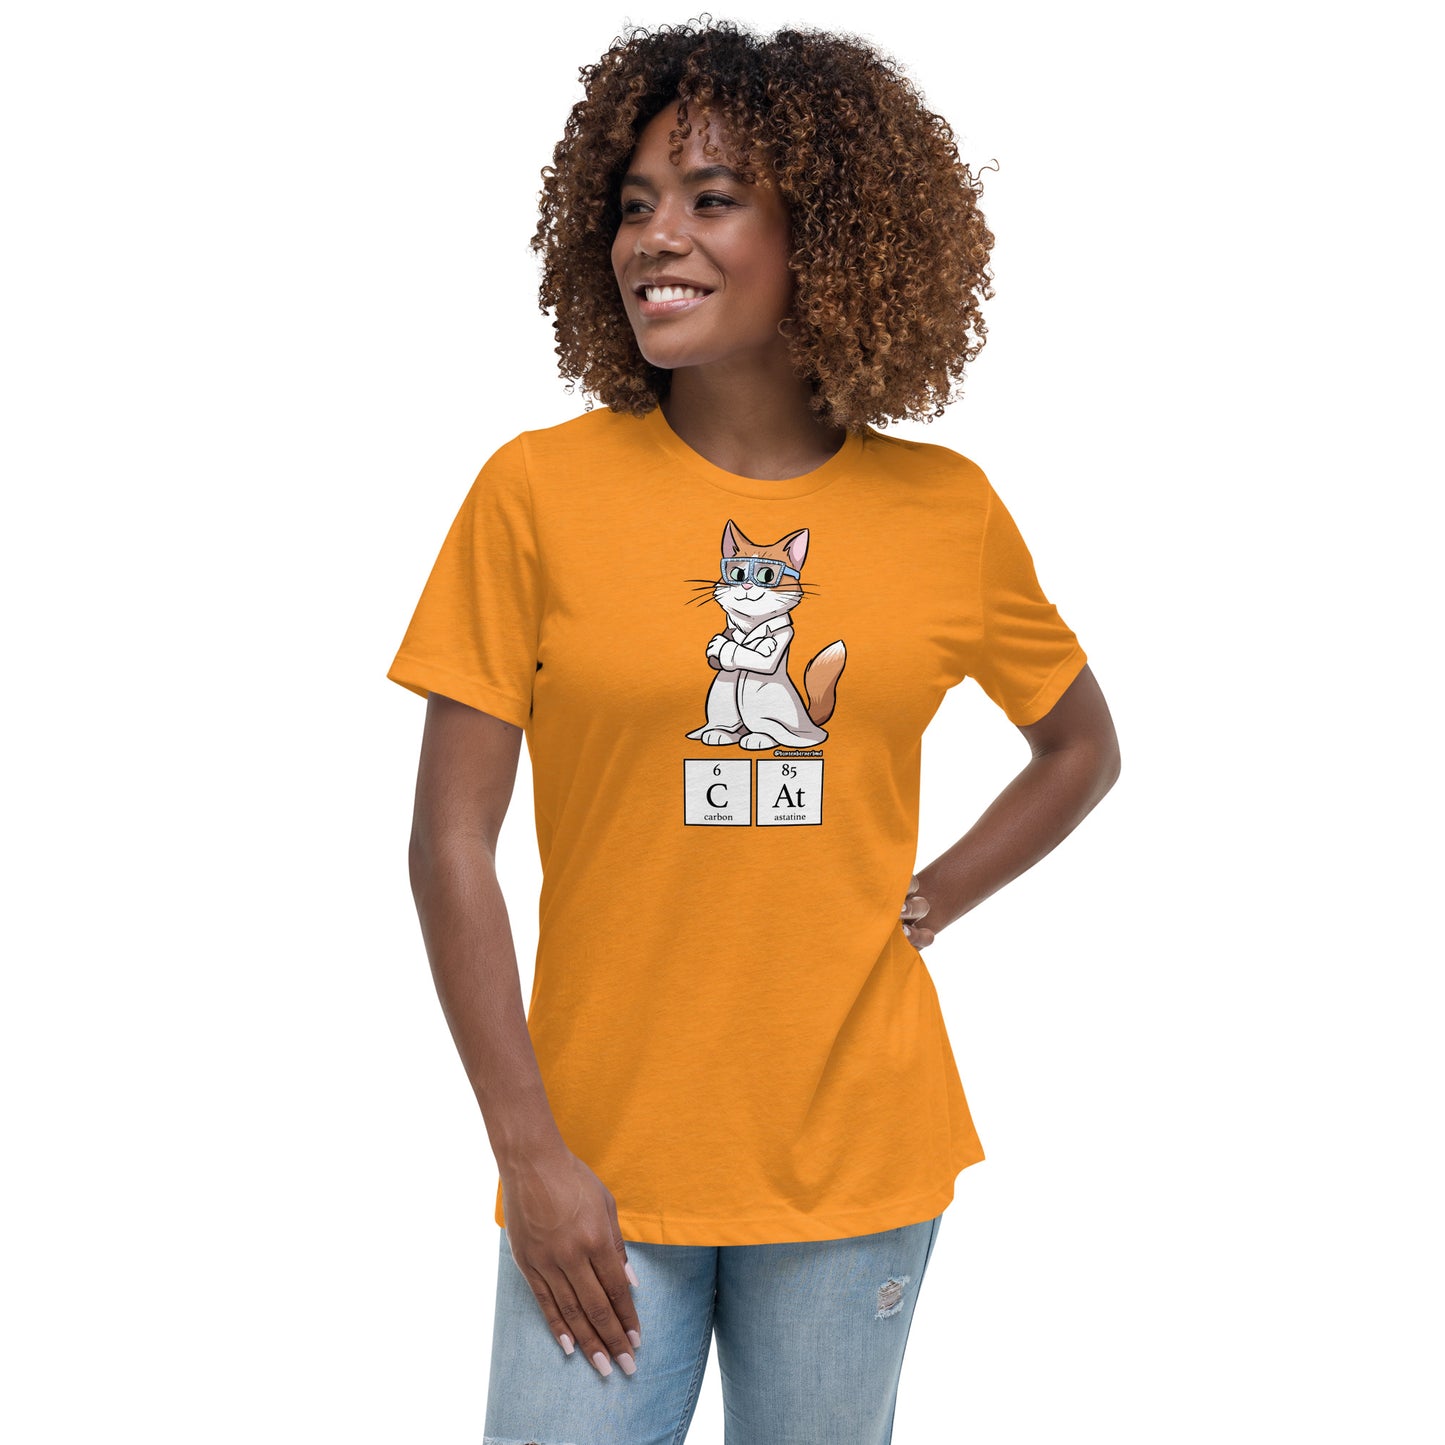 Women's Relaxed T-Shirt: CAT in Periodic Symbols